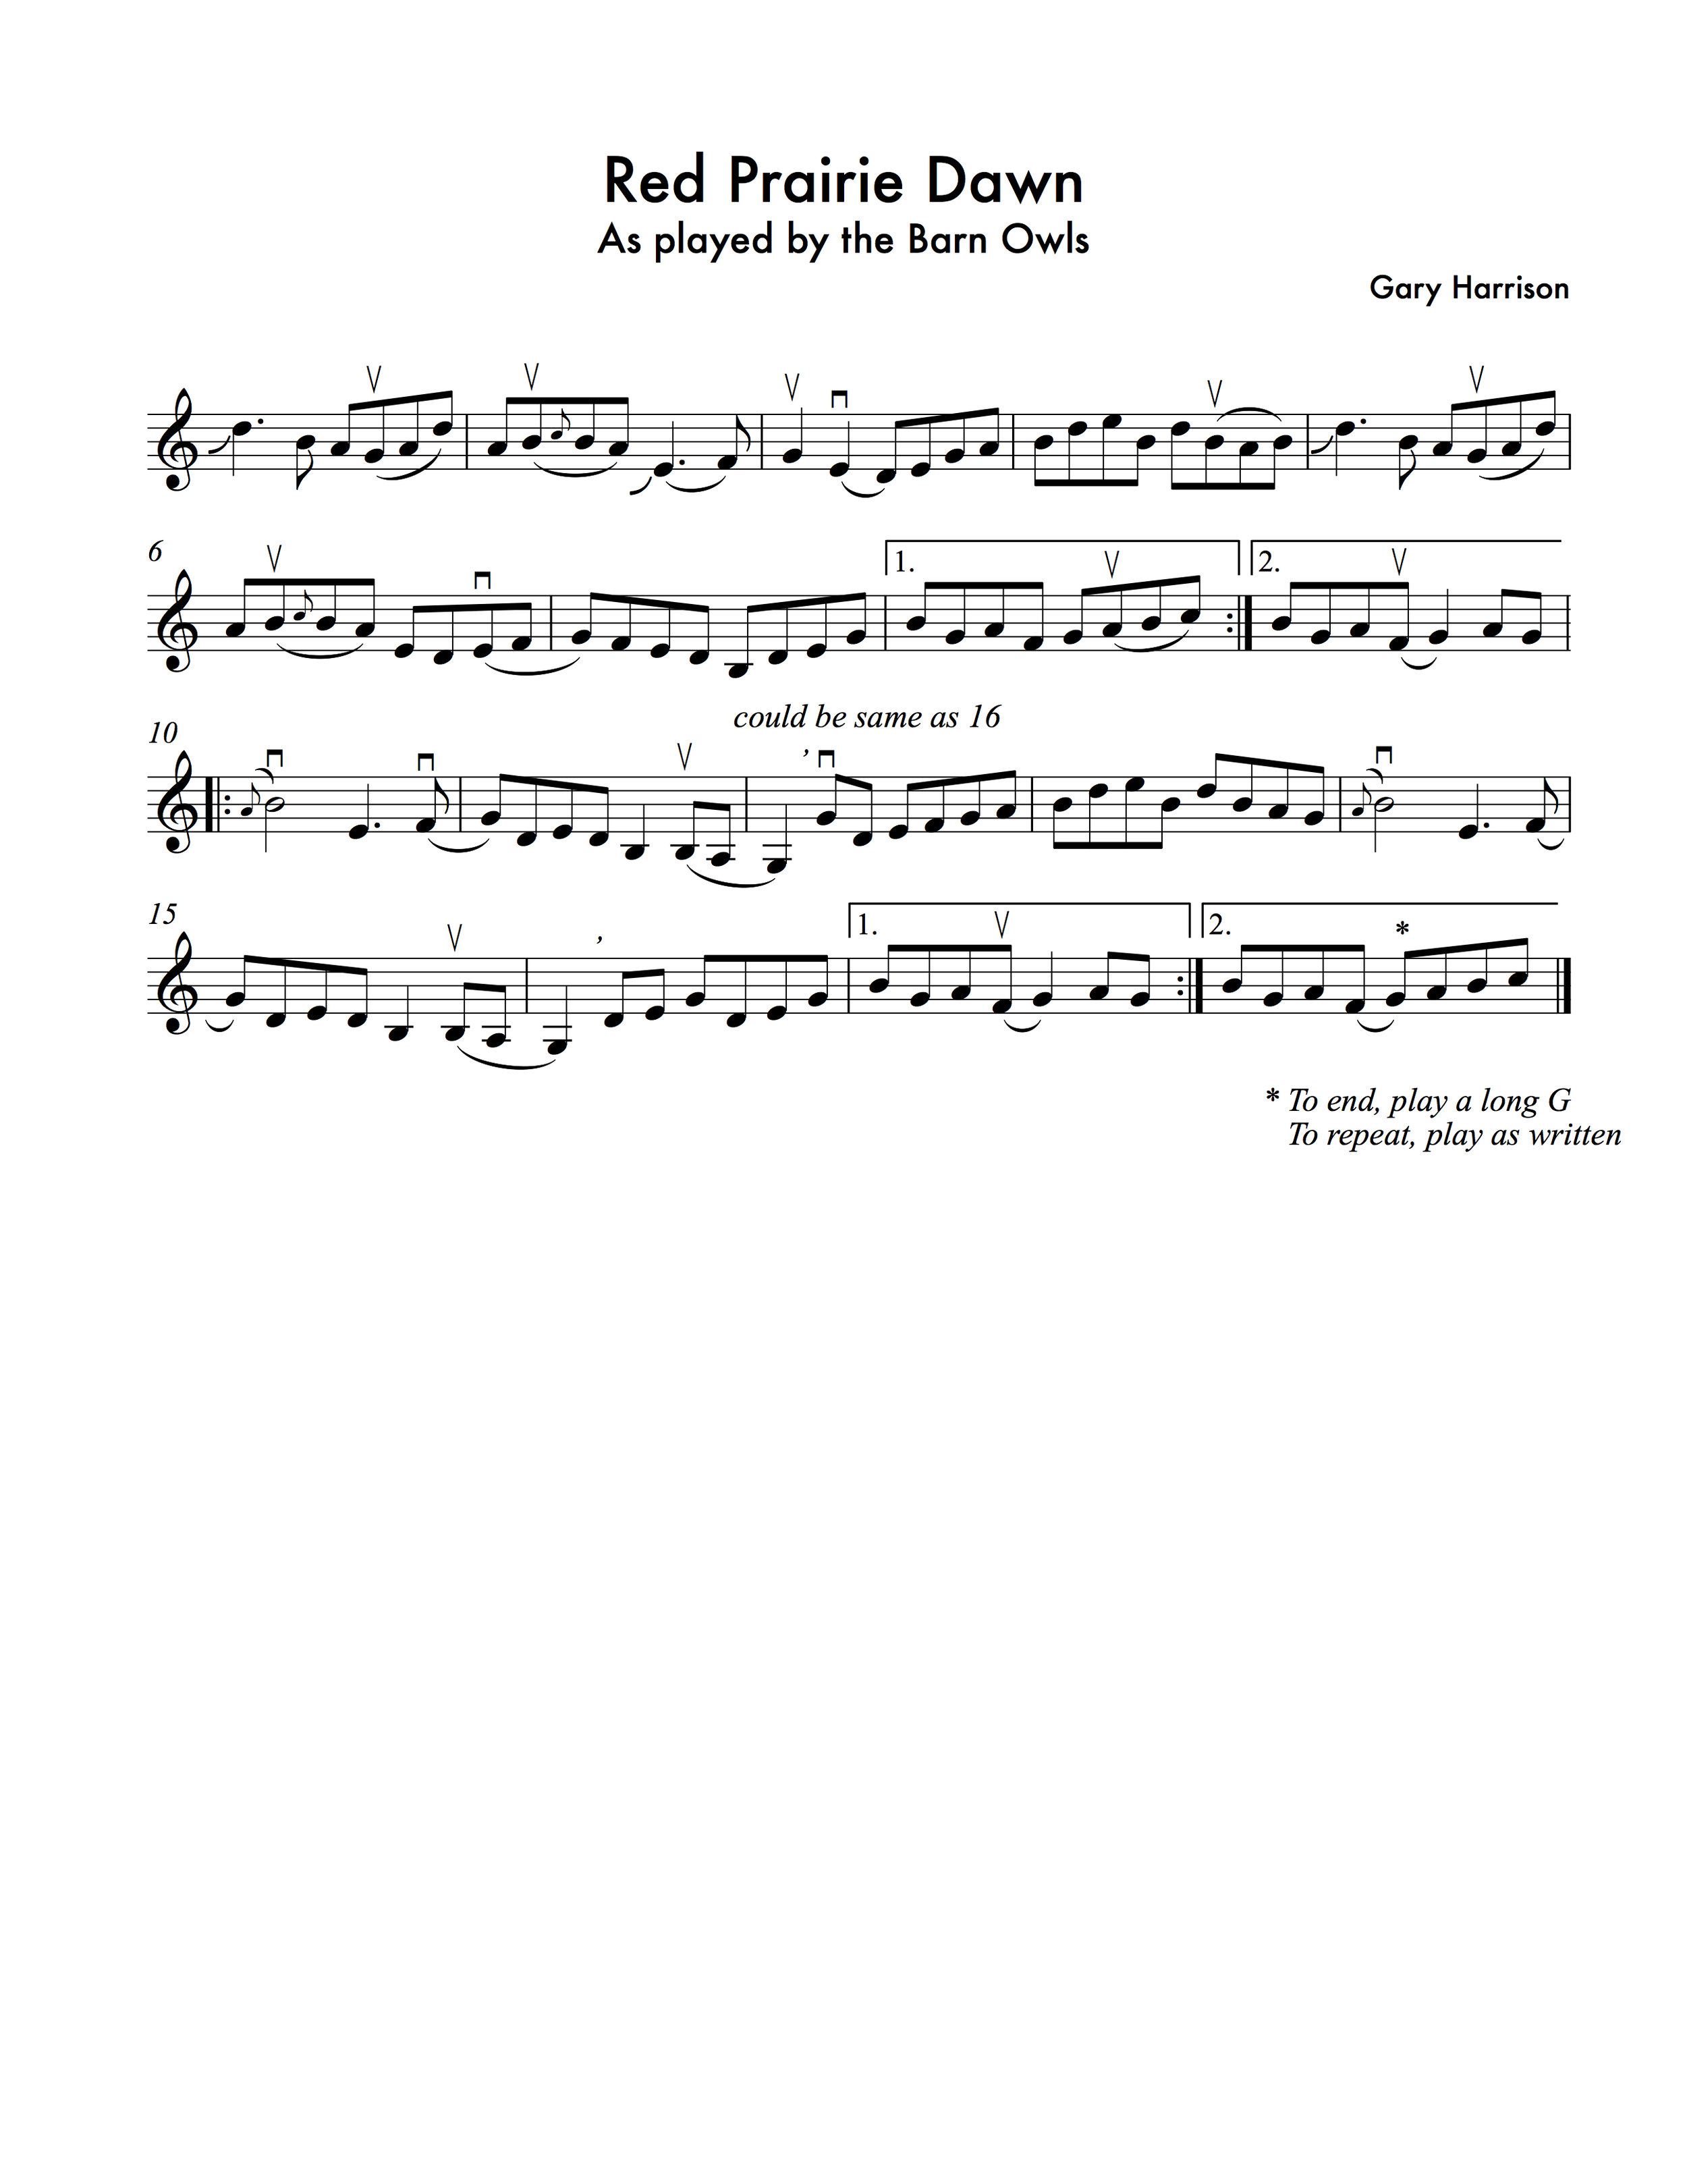 Walk Him Up the Stairs Sheet Music - 1 Arrangement Available